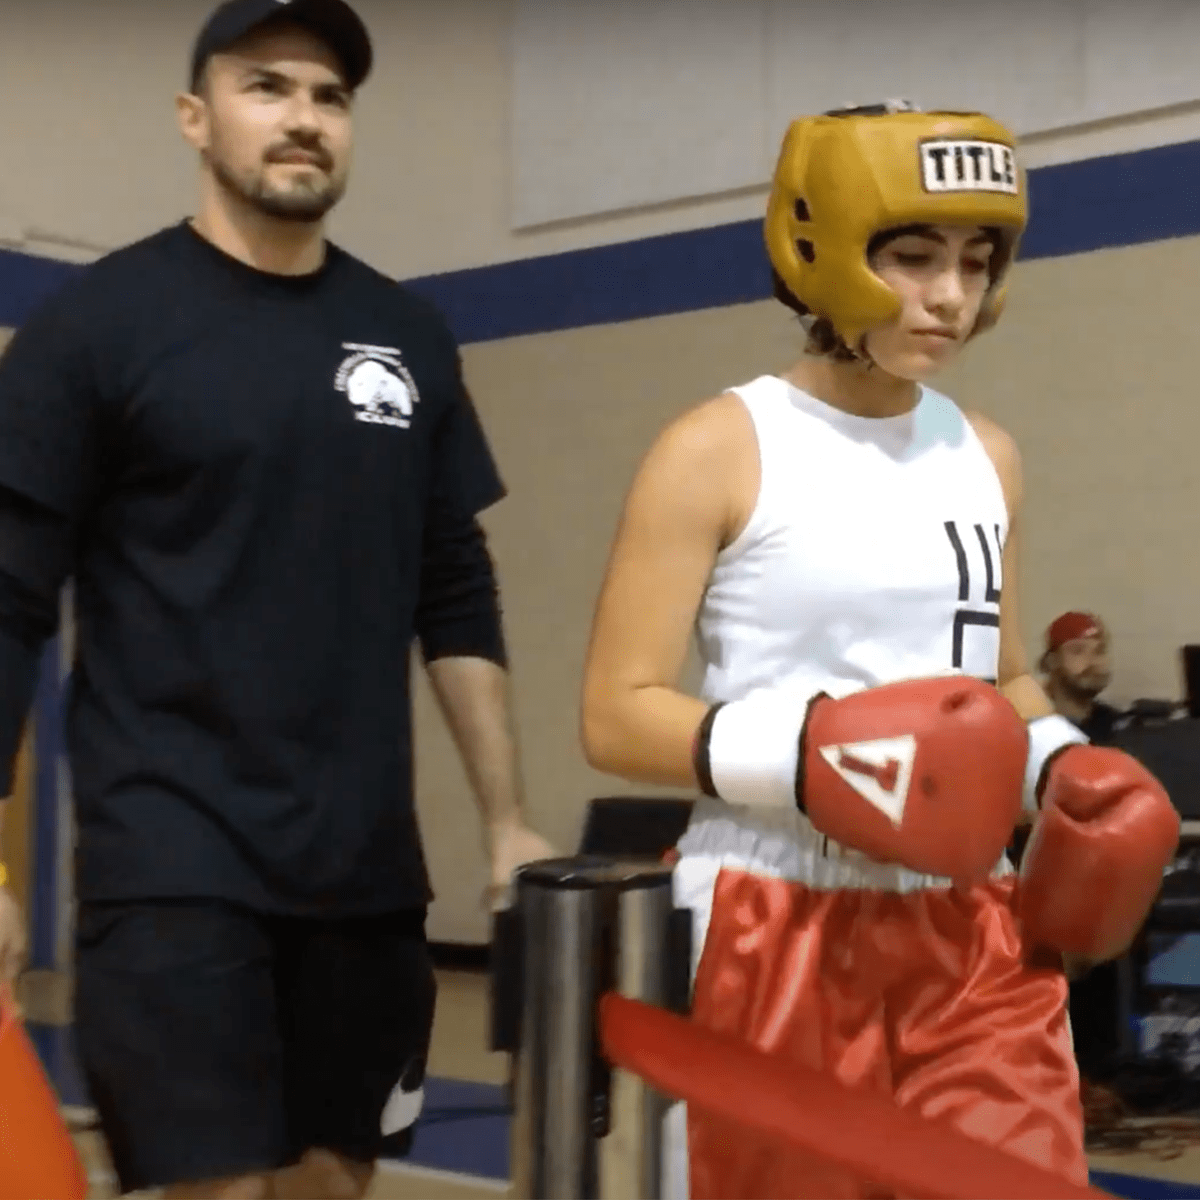 17 year old Latina boxing champ Jocelyn Camarillo excels in the male dominated sport